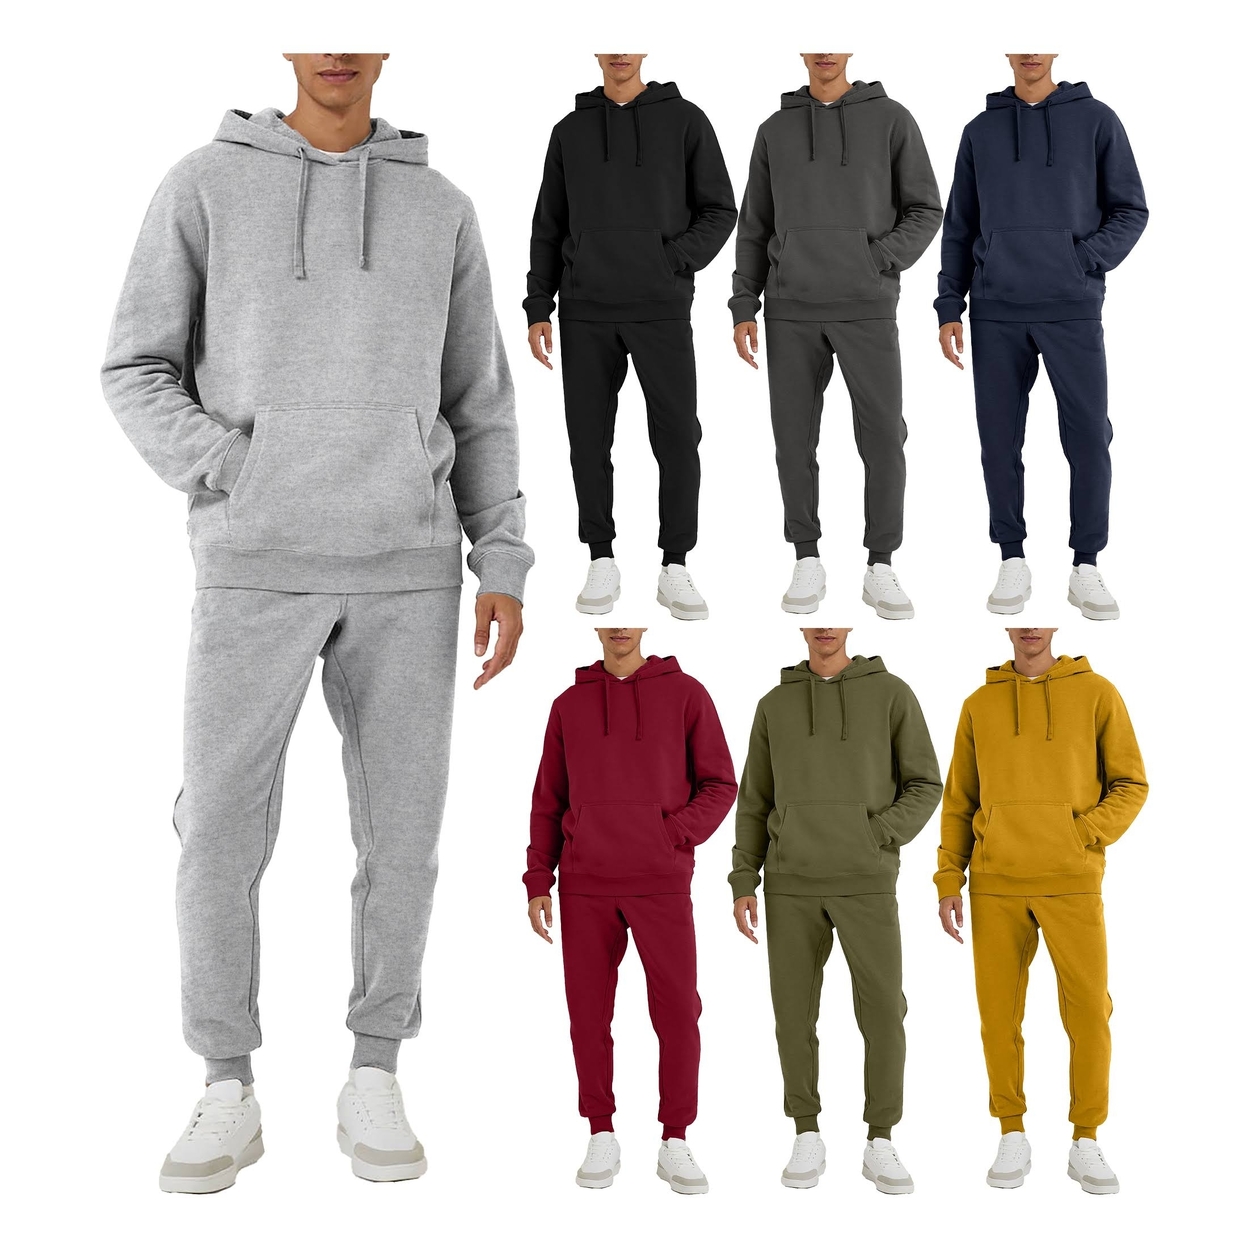 Multi-Pack: Men's Big & Tall Athletic Active Jogging Winter Warm Fleece Lined Pullover Tracksuit Set - Grey, 1-pack, X-large